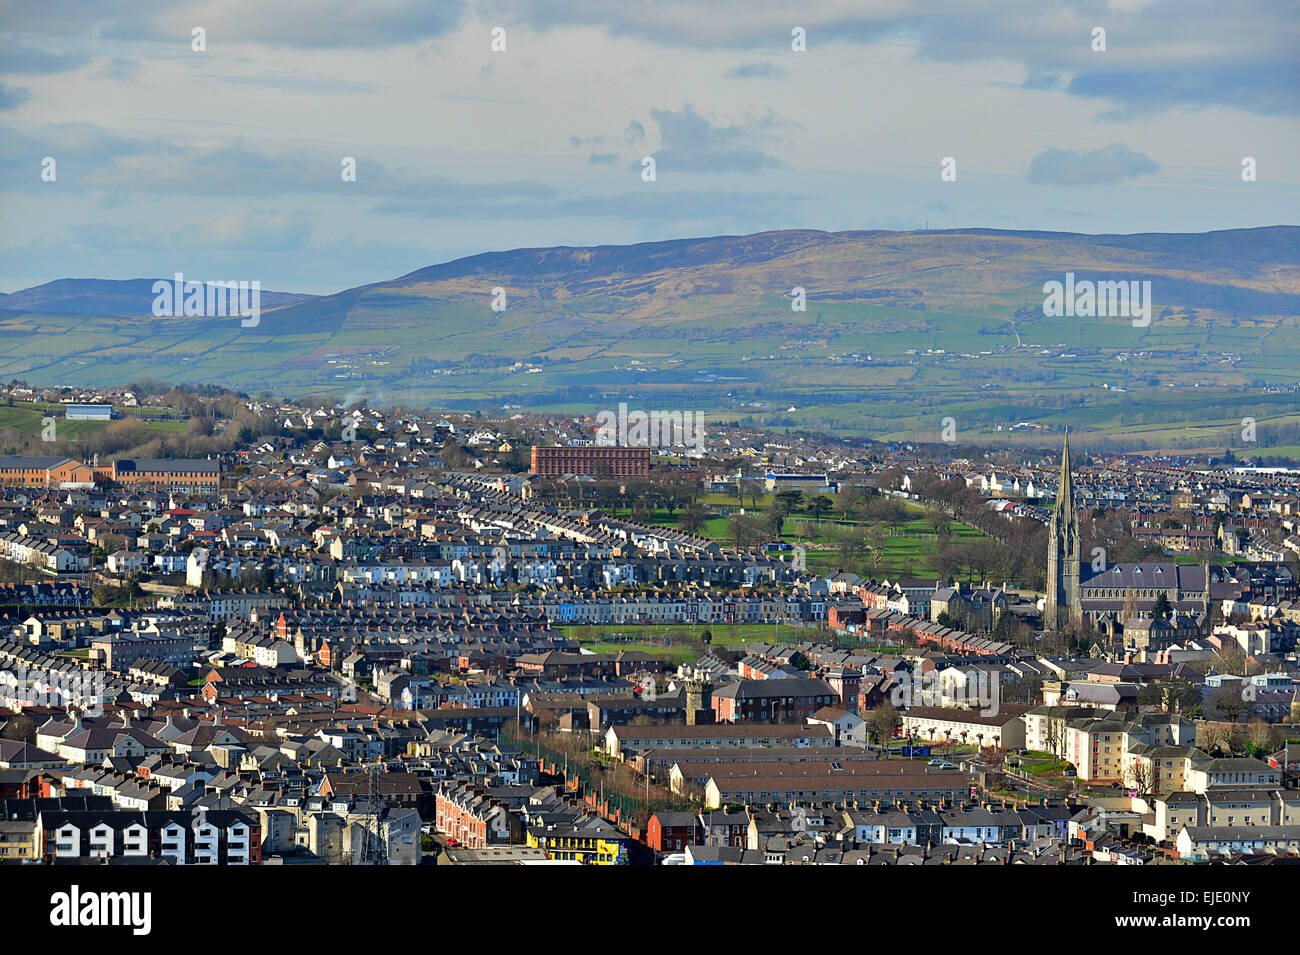 Londonderry, Derry, skyline and Saint Columbs Cathedral Stock Photo